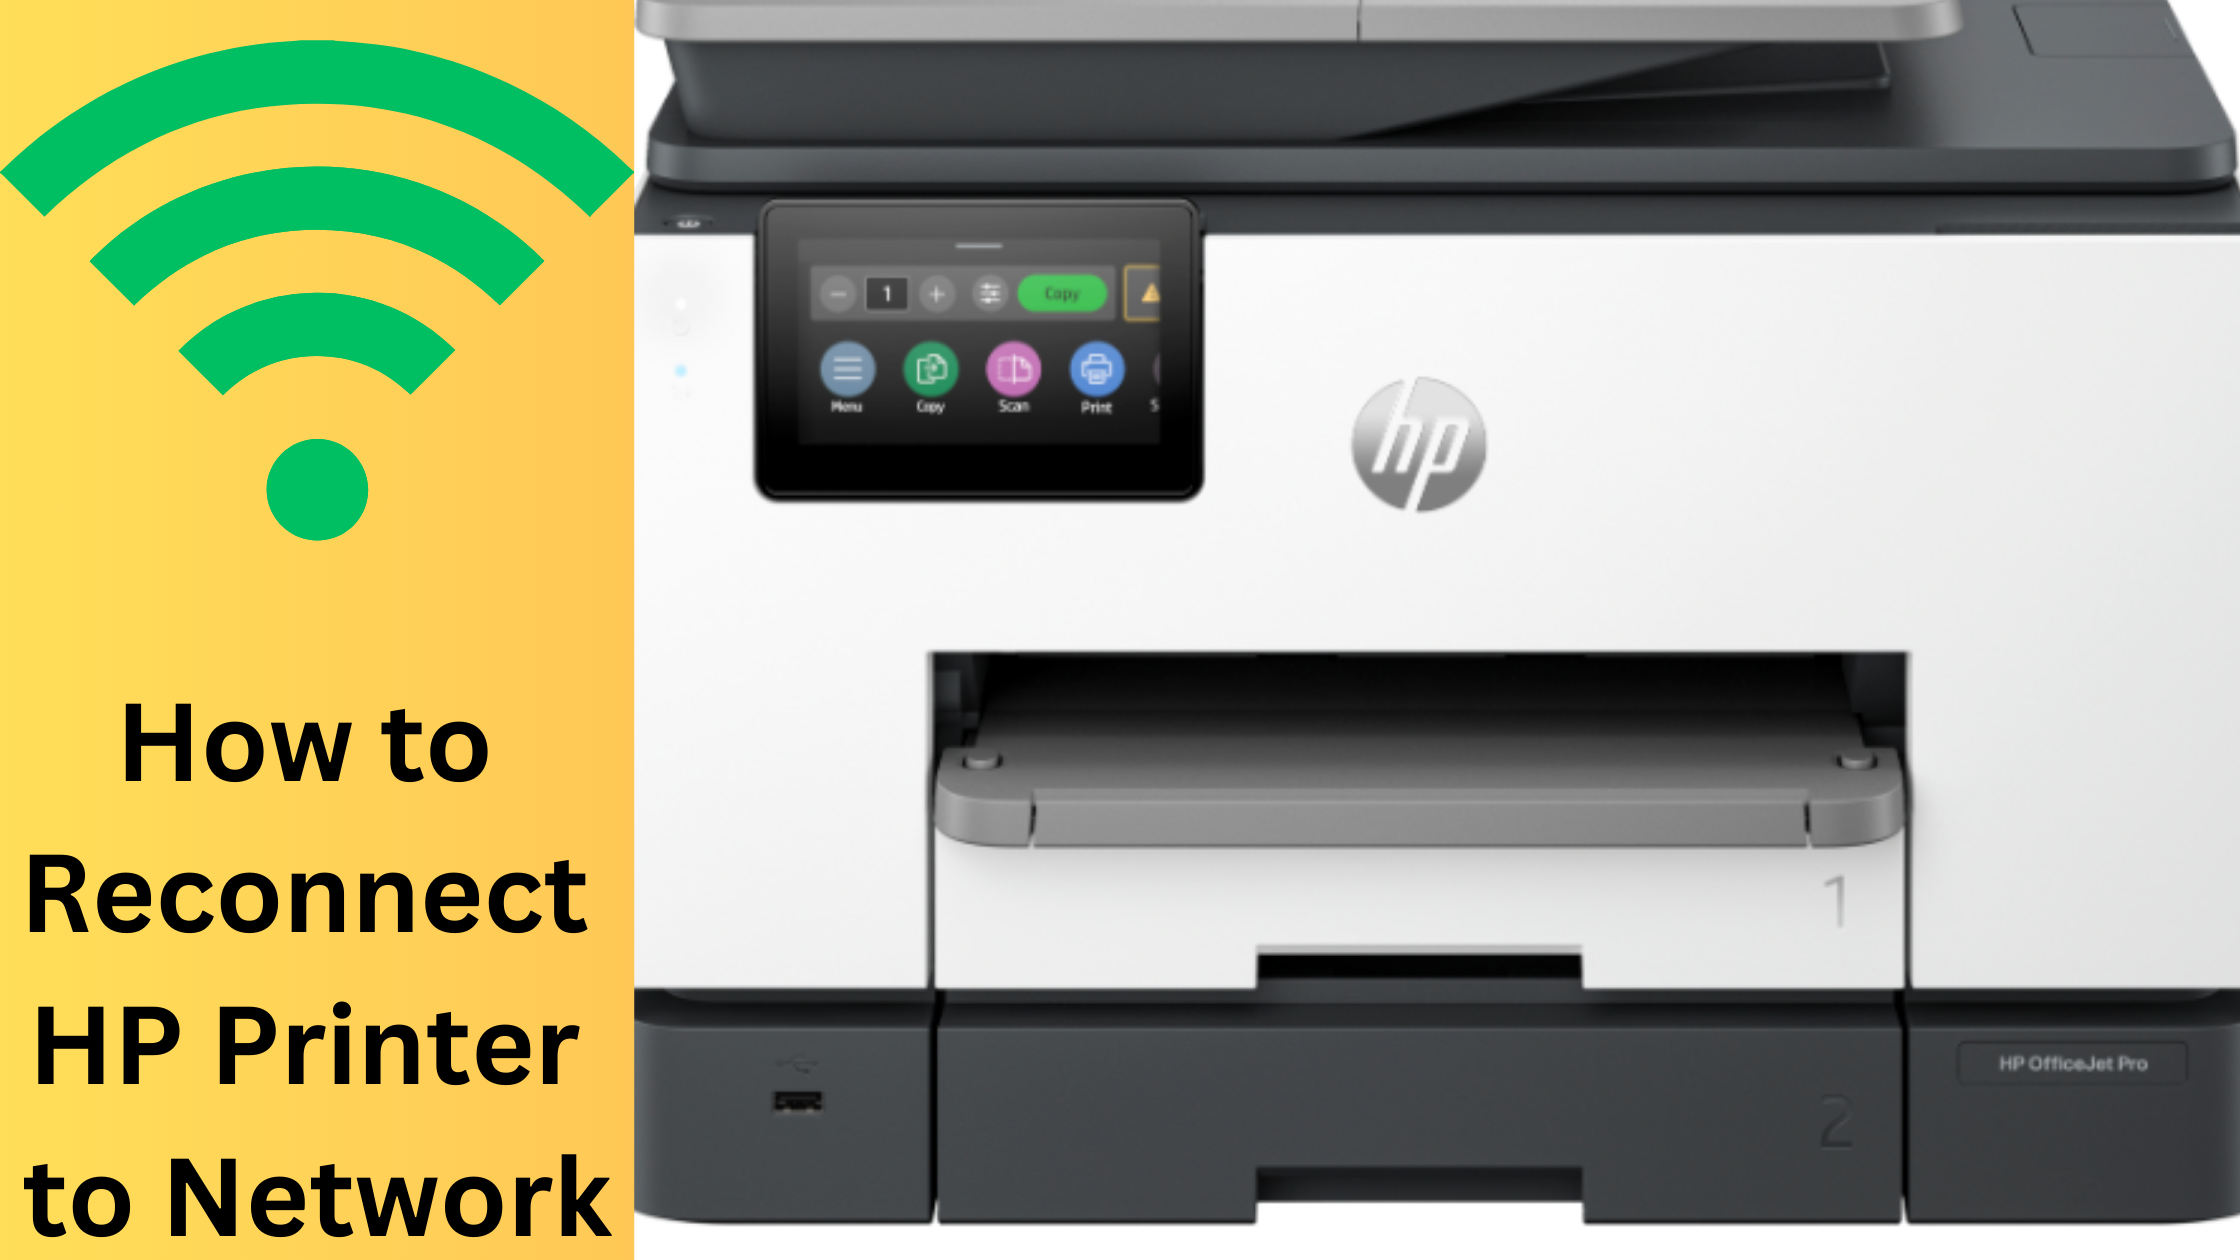 How to reconnect HP printer to network